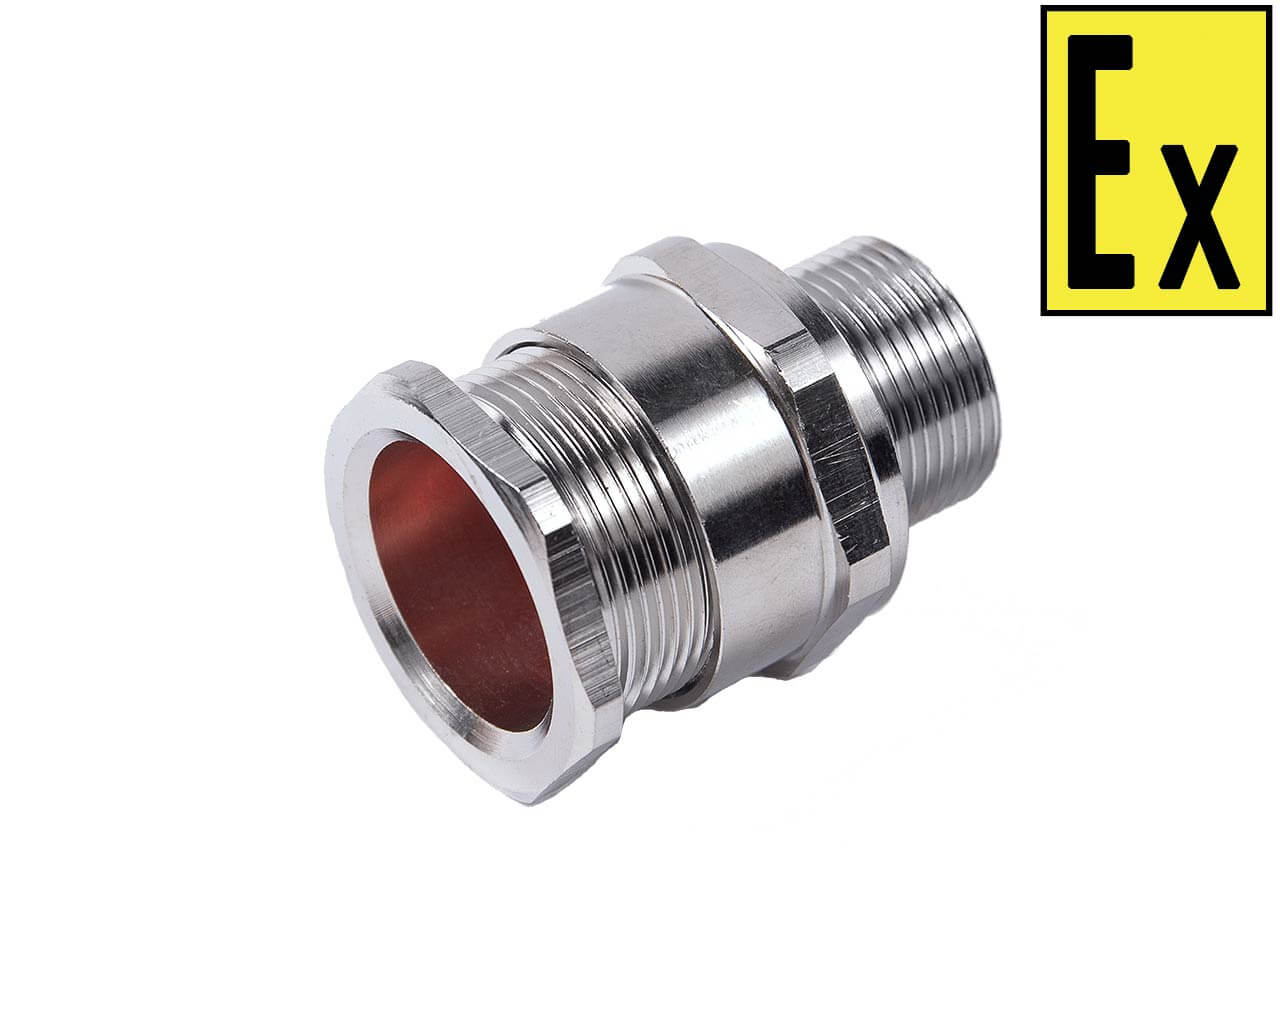 			CABLE GLANDS  FOR UNARMORED CABLE